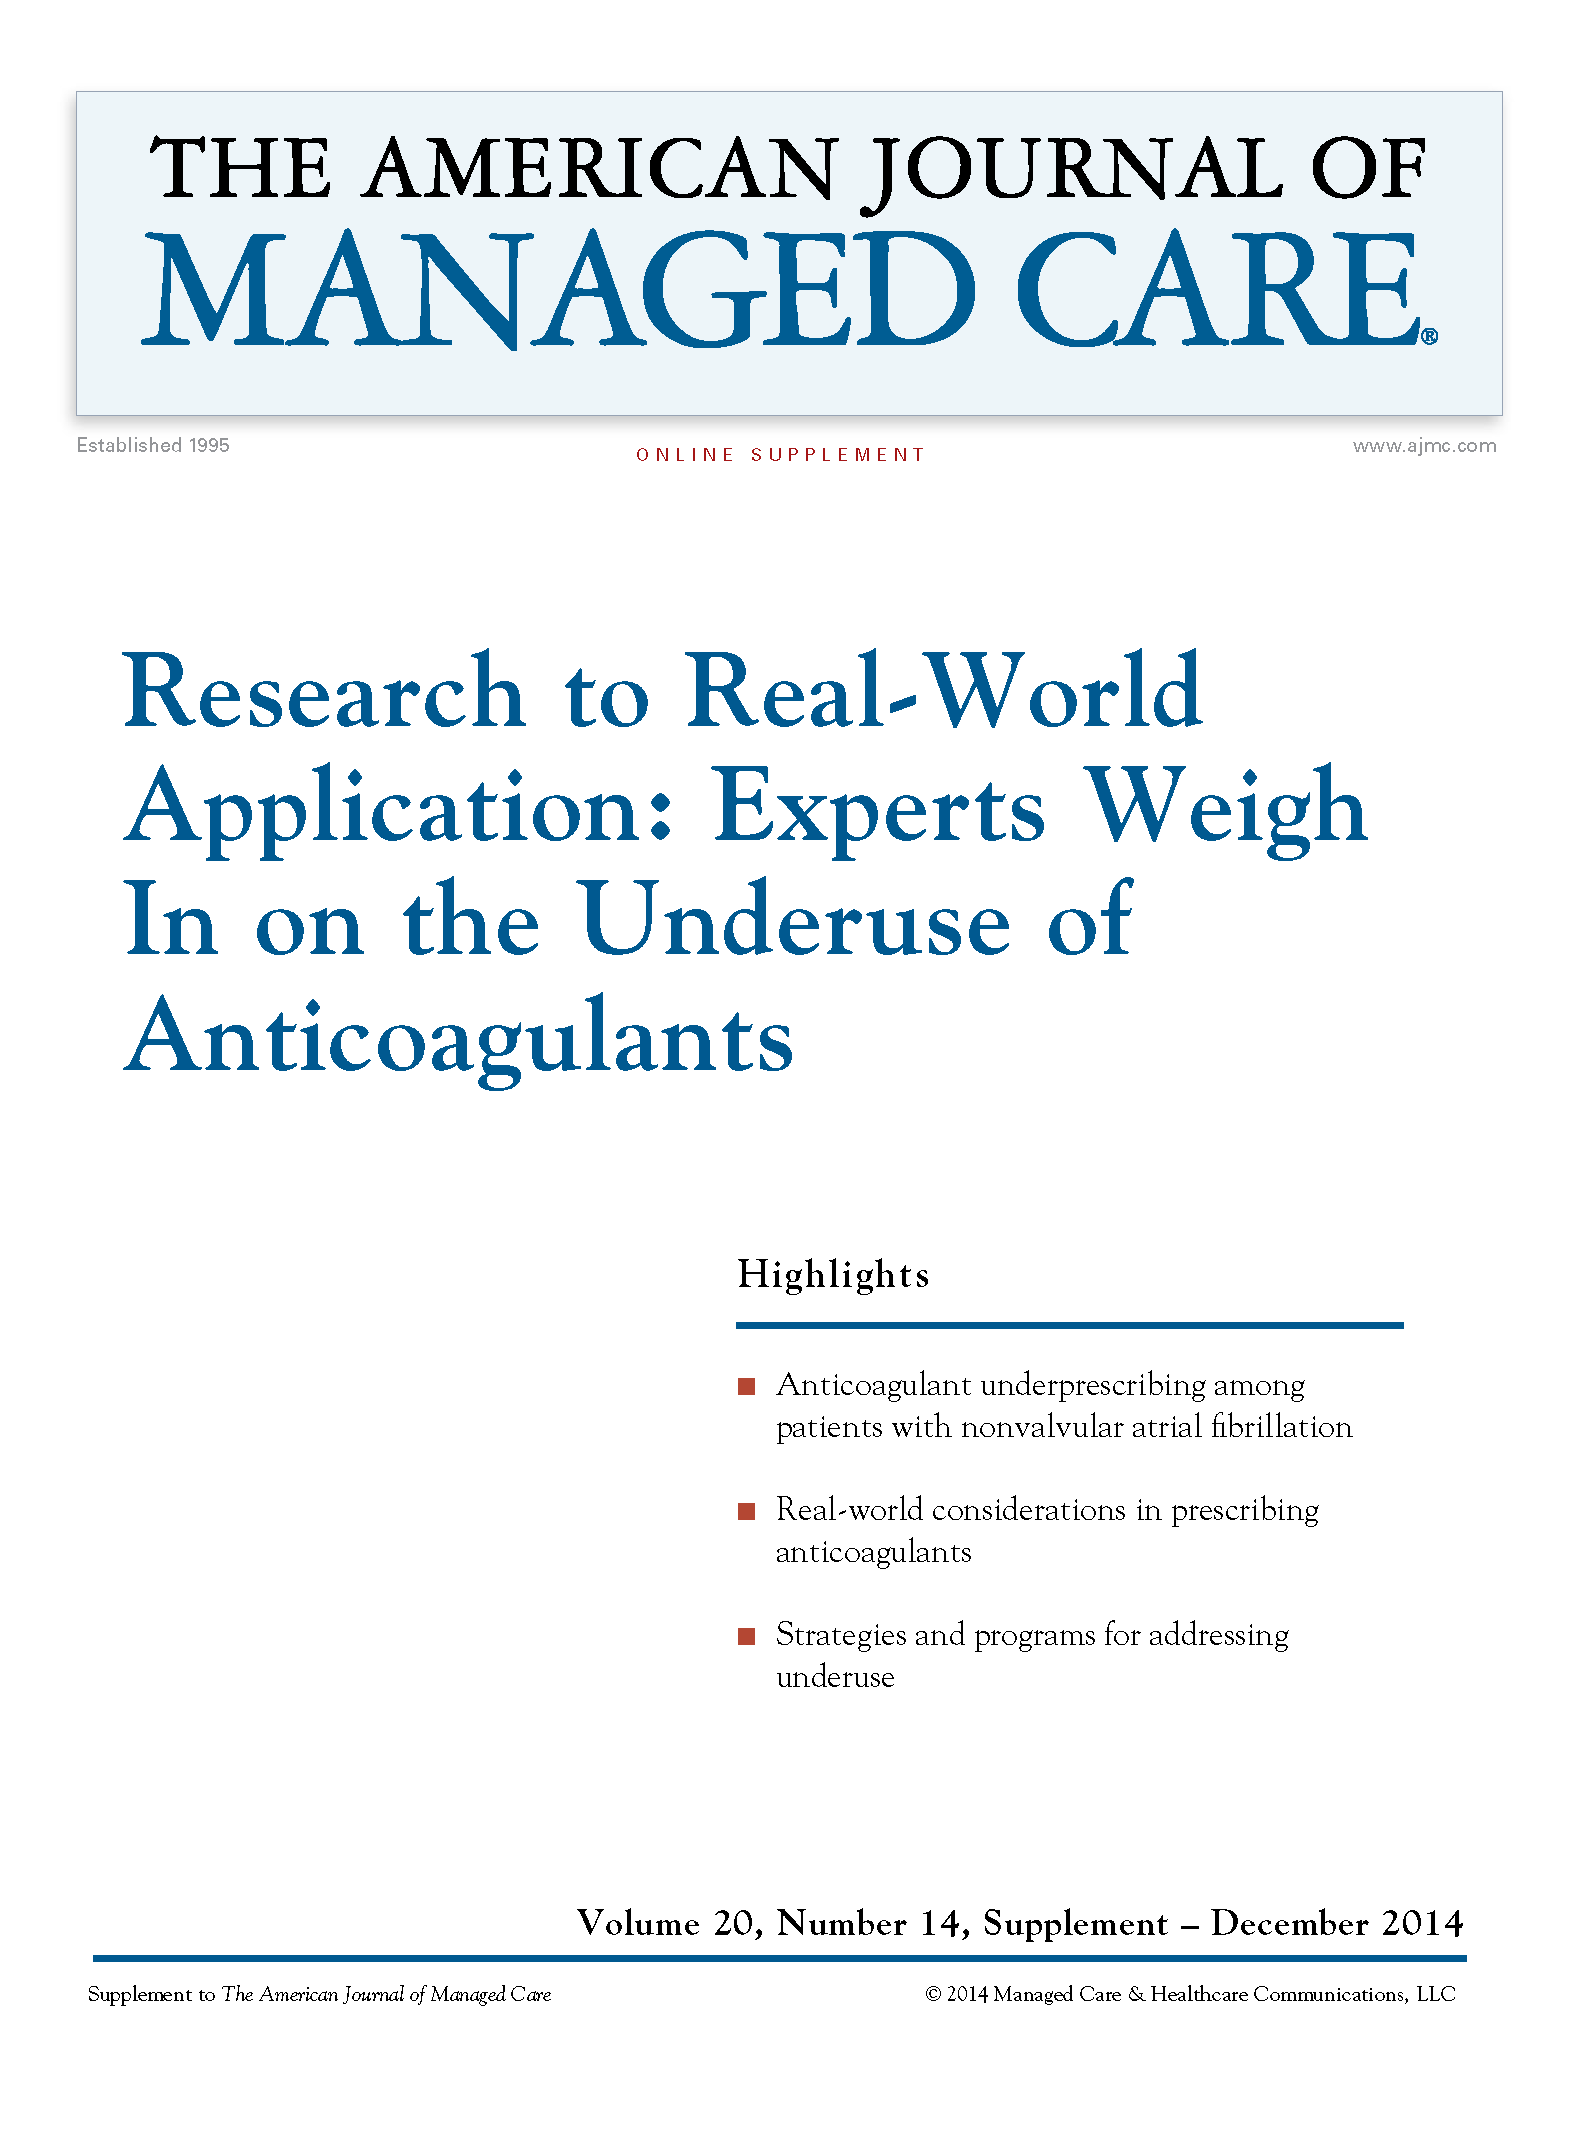 Research to Real-World Application: Experts Weigh In on the Underuse of Anticoagulants